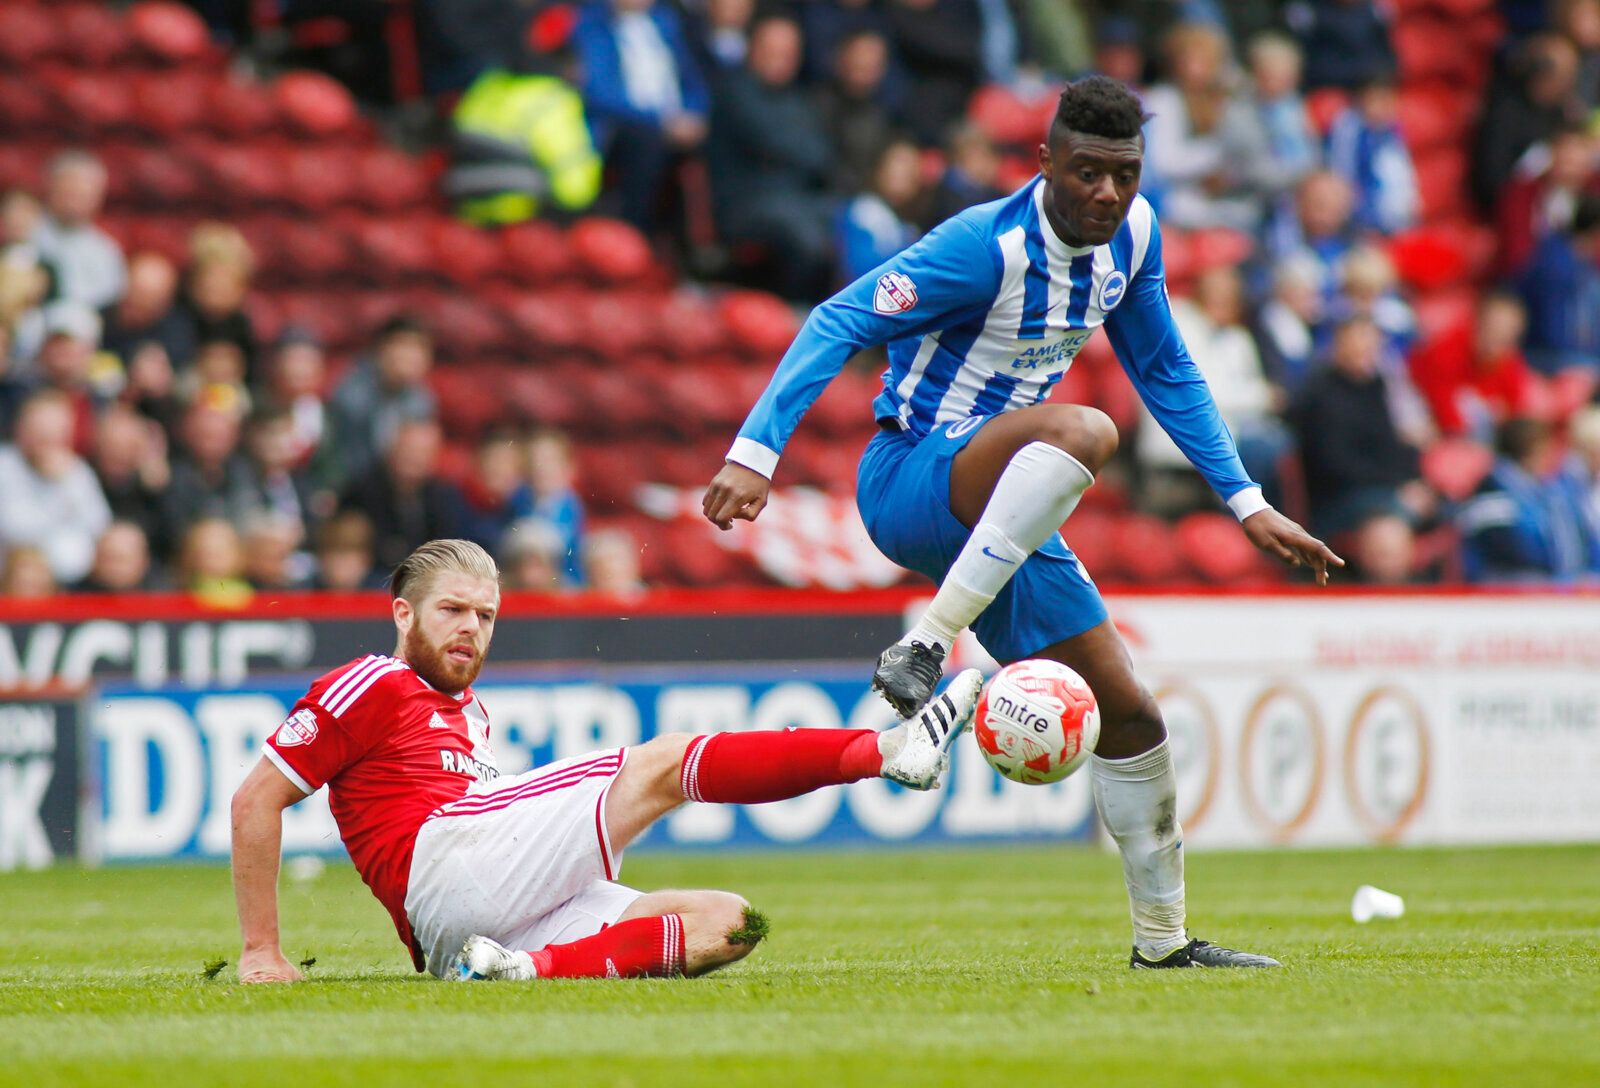 Football - Middlesbrough v Brighton &amp; Hove Albion - Sky Bet Football League Championship - The Riverside Stadium - 2/5/15 
Adam Clayton of Middlesbrough (L) and Rohan Ince of Brighton and Hove Albion in action 
Mandatory Credit: Action Images / Ed Sykes 
Livepic 
EDITORIAL USE ONLY. No use with unauthorized audio, video, data, fixture lists, club/league logos or 